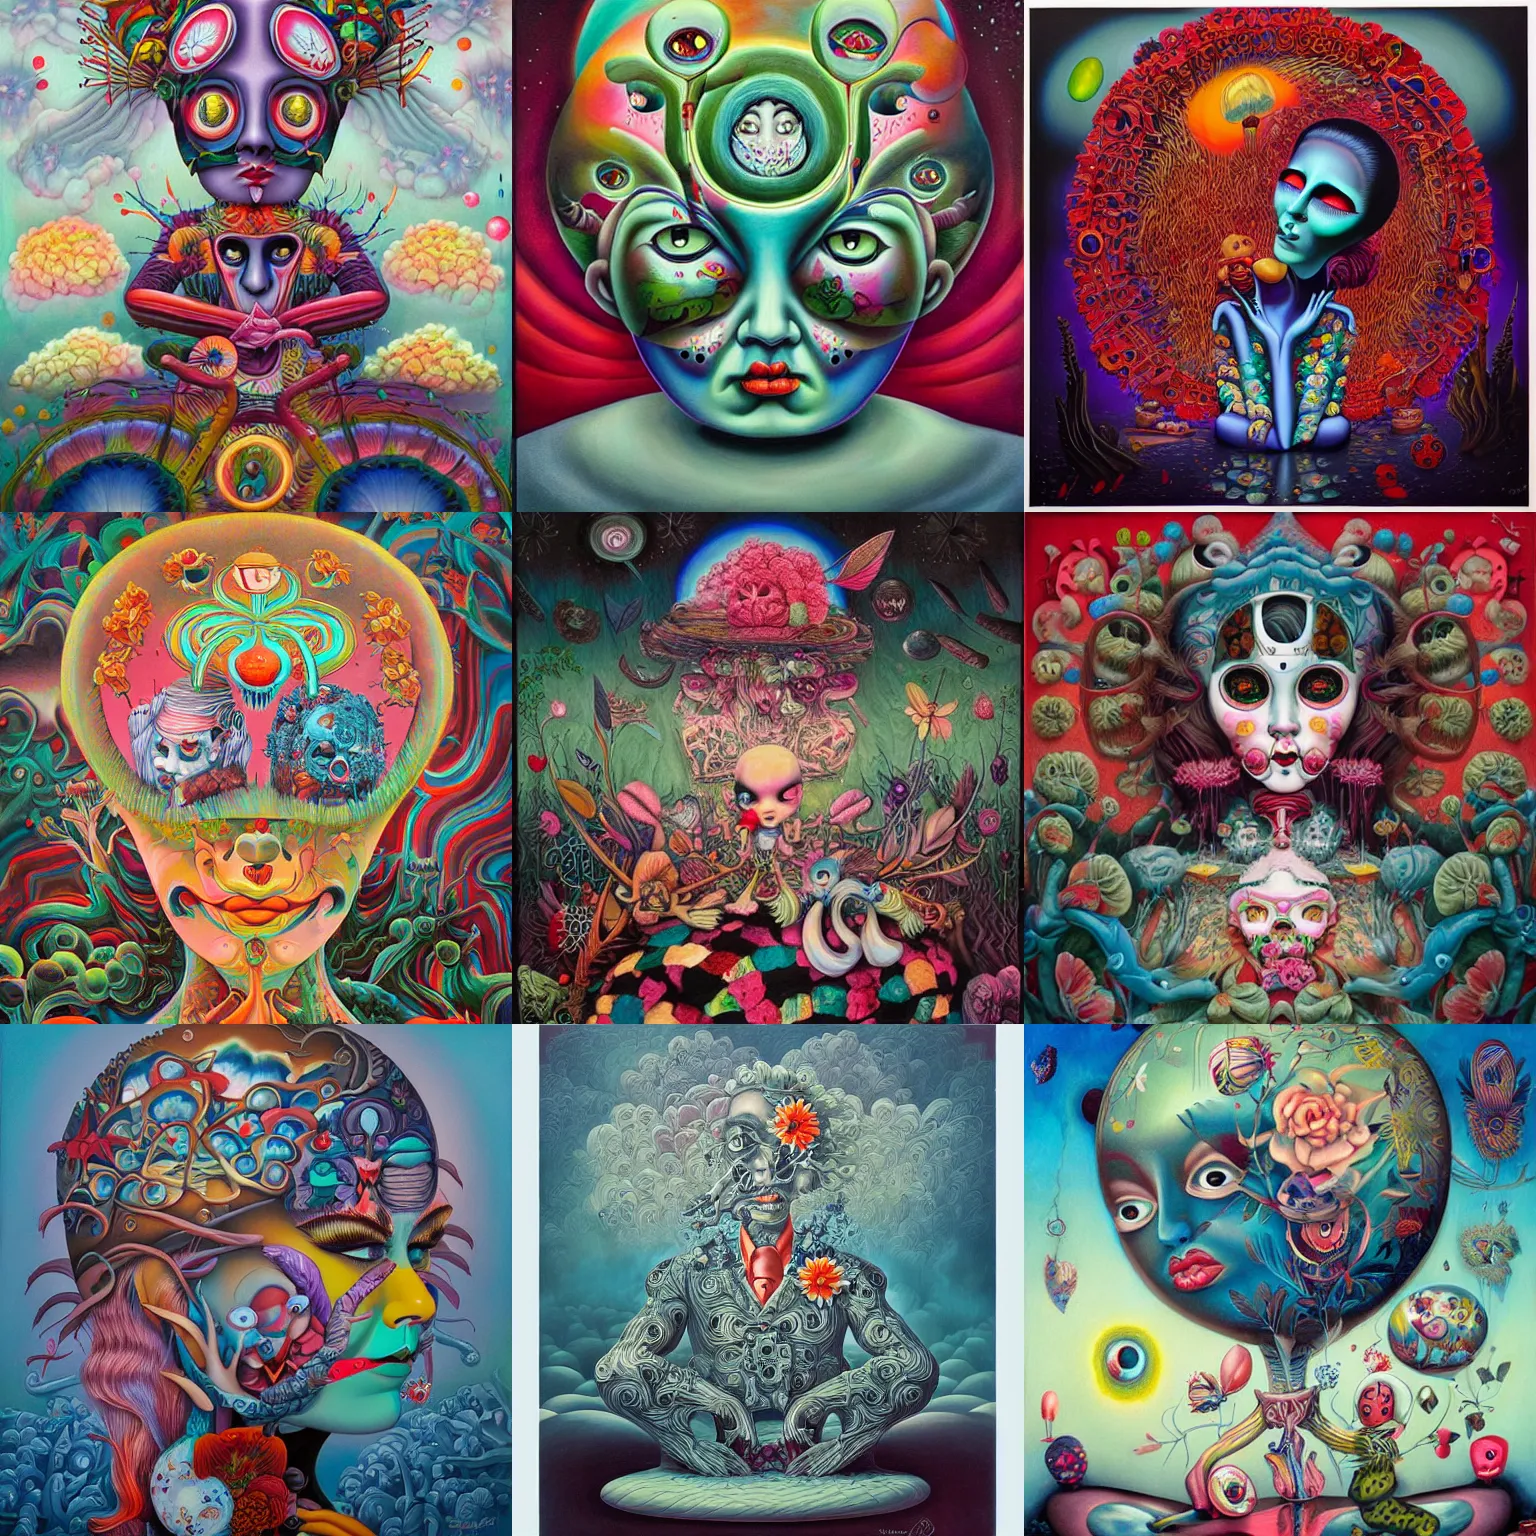 Prompt: painting by rik oostenbroek, james jean, mark ryden, in the style of dmt art